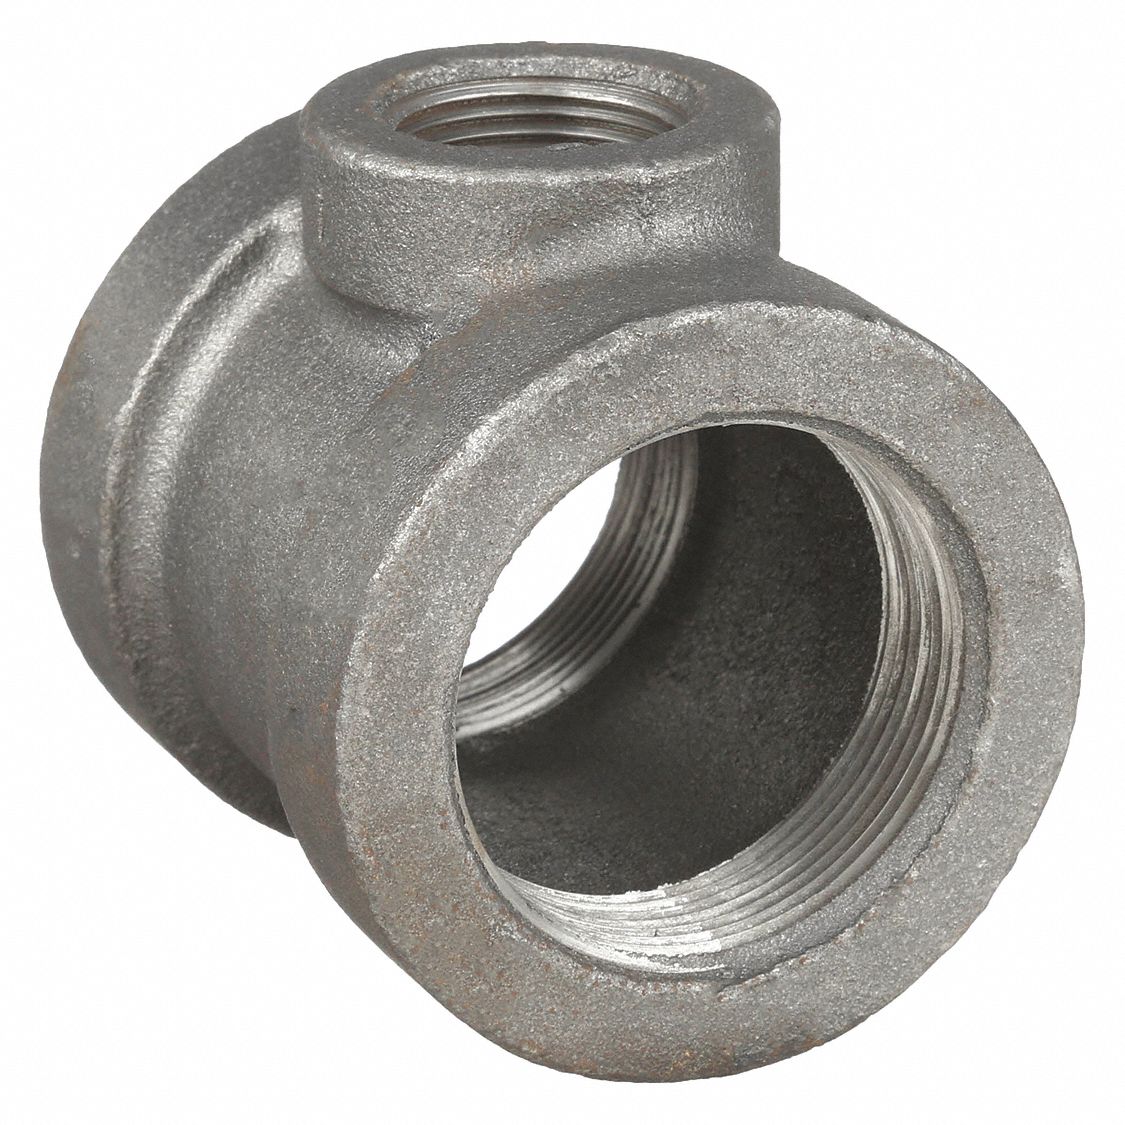 Reducing Tee: Cast Iron, 3 in x 3 in x 2 in Fitting Pipe Size, Female NPT x  Female NPT x Female NPT